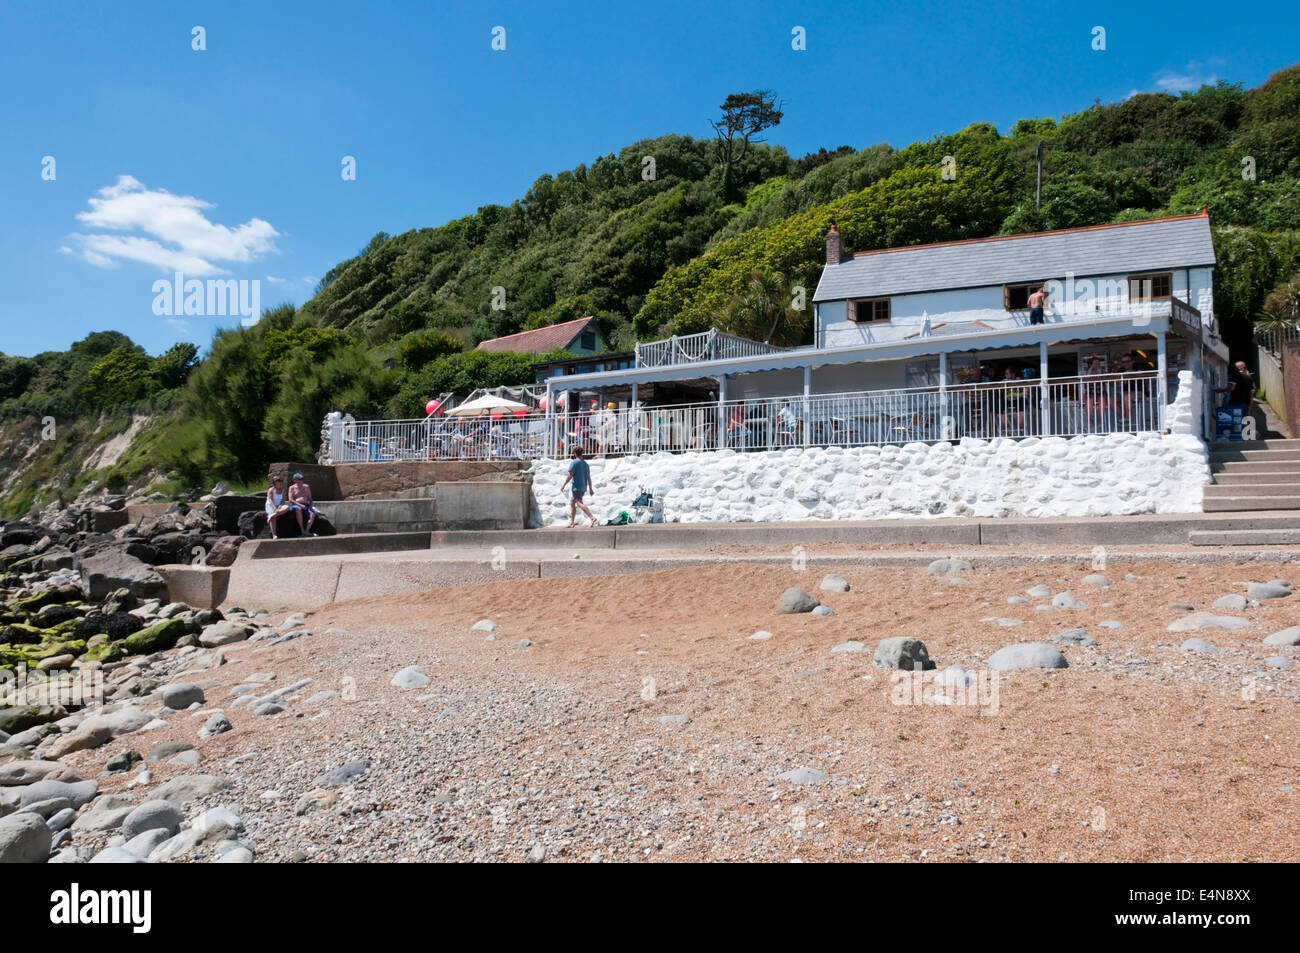 The Beach Shack at Steephill Cove, Isle of Wight. Stock Photo